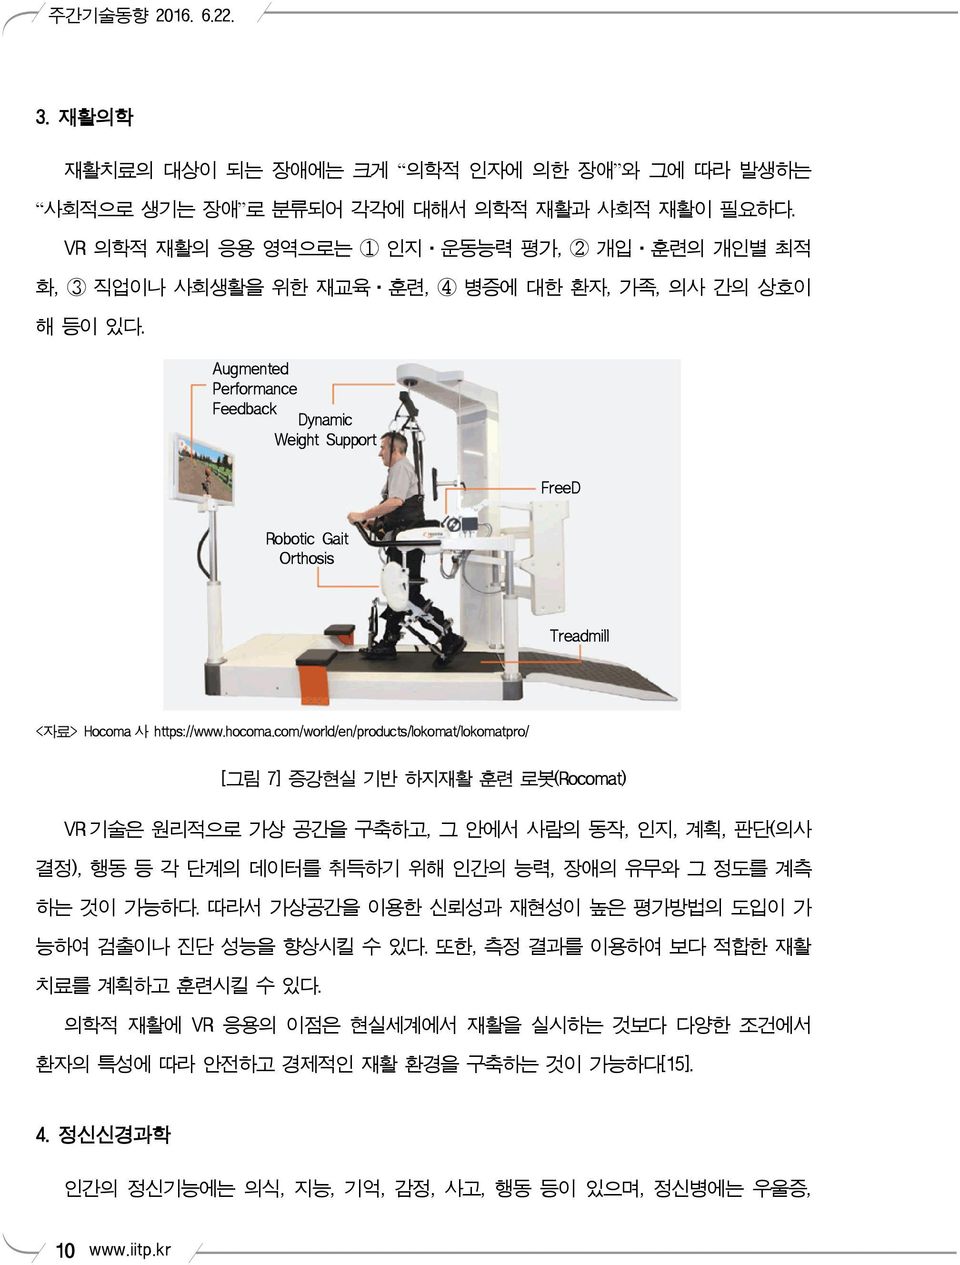 Augmented Performance Feedback Dynamic Weight Support FreeD Robotic Gait Orthosis Treadmill <자료> Hocoma 사 https://www.hocoma.